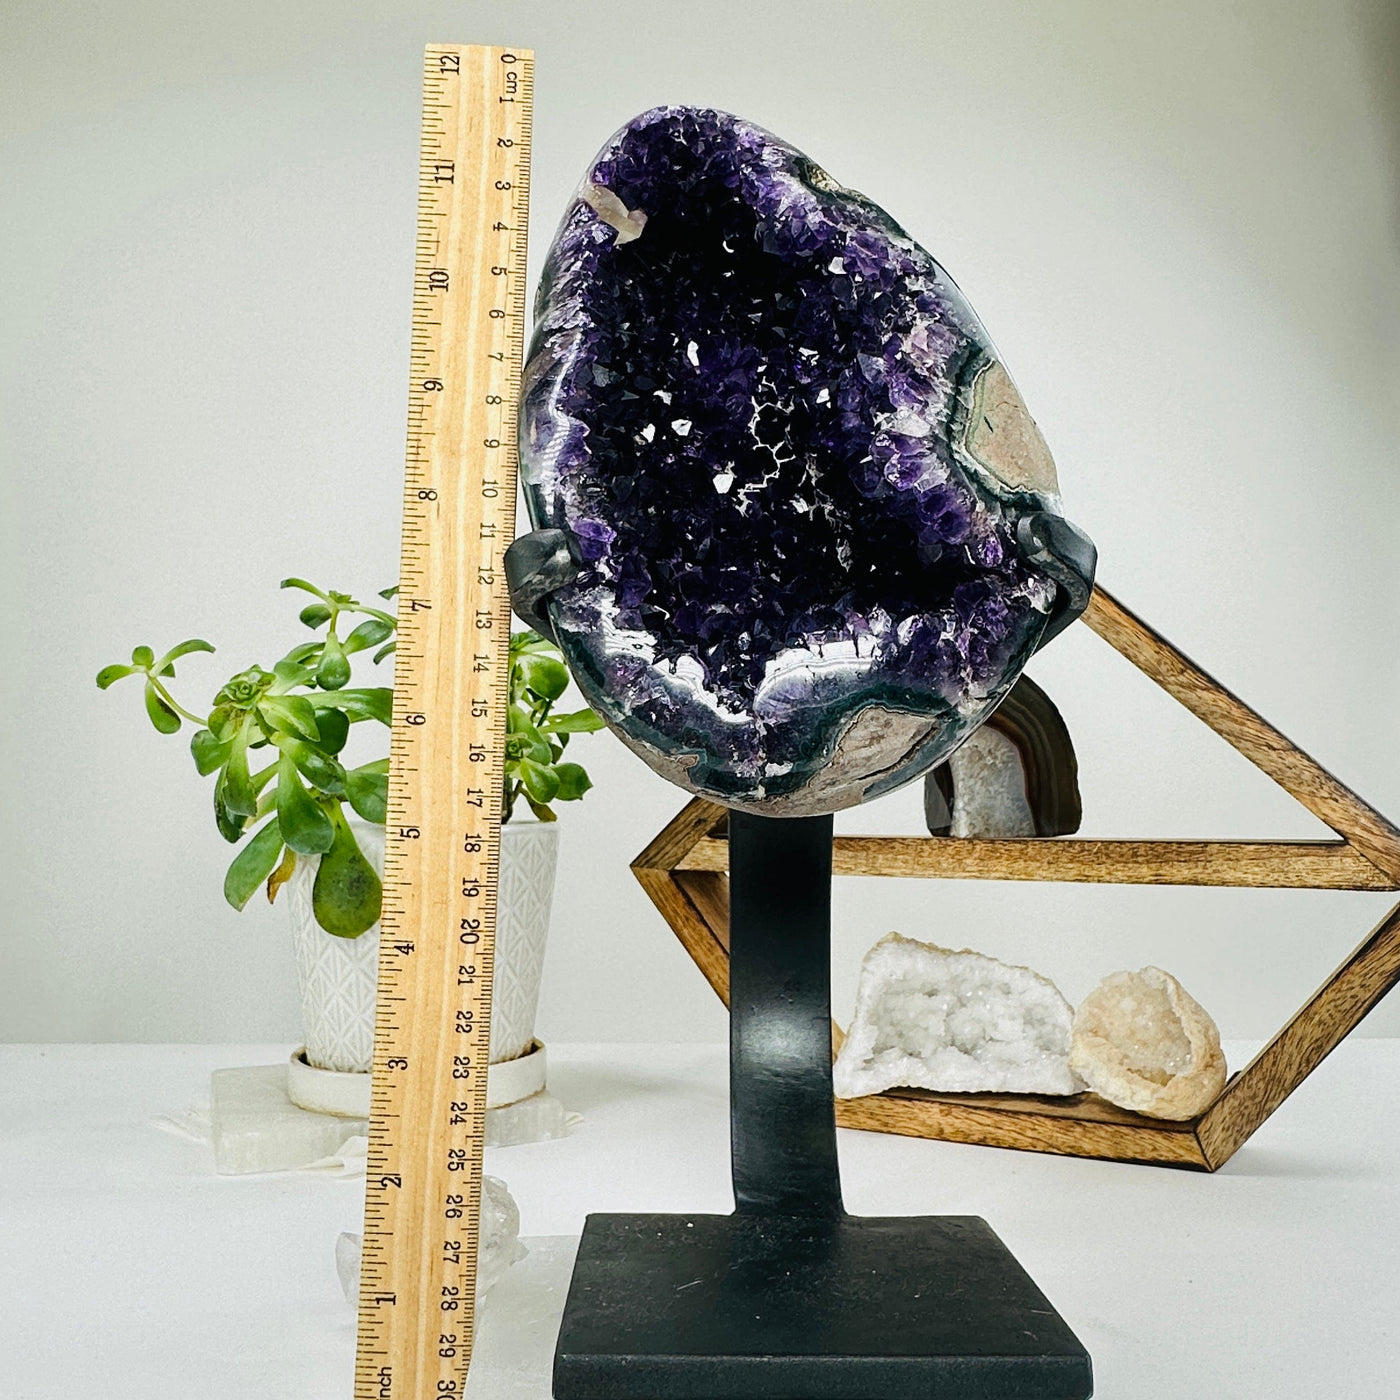 amethyst on metal stand next to a ruler for size reference